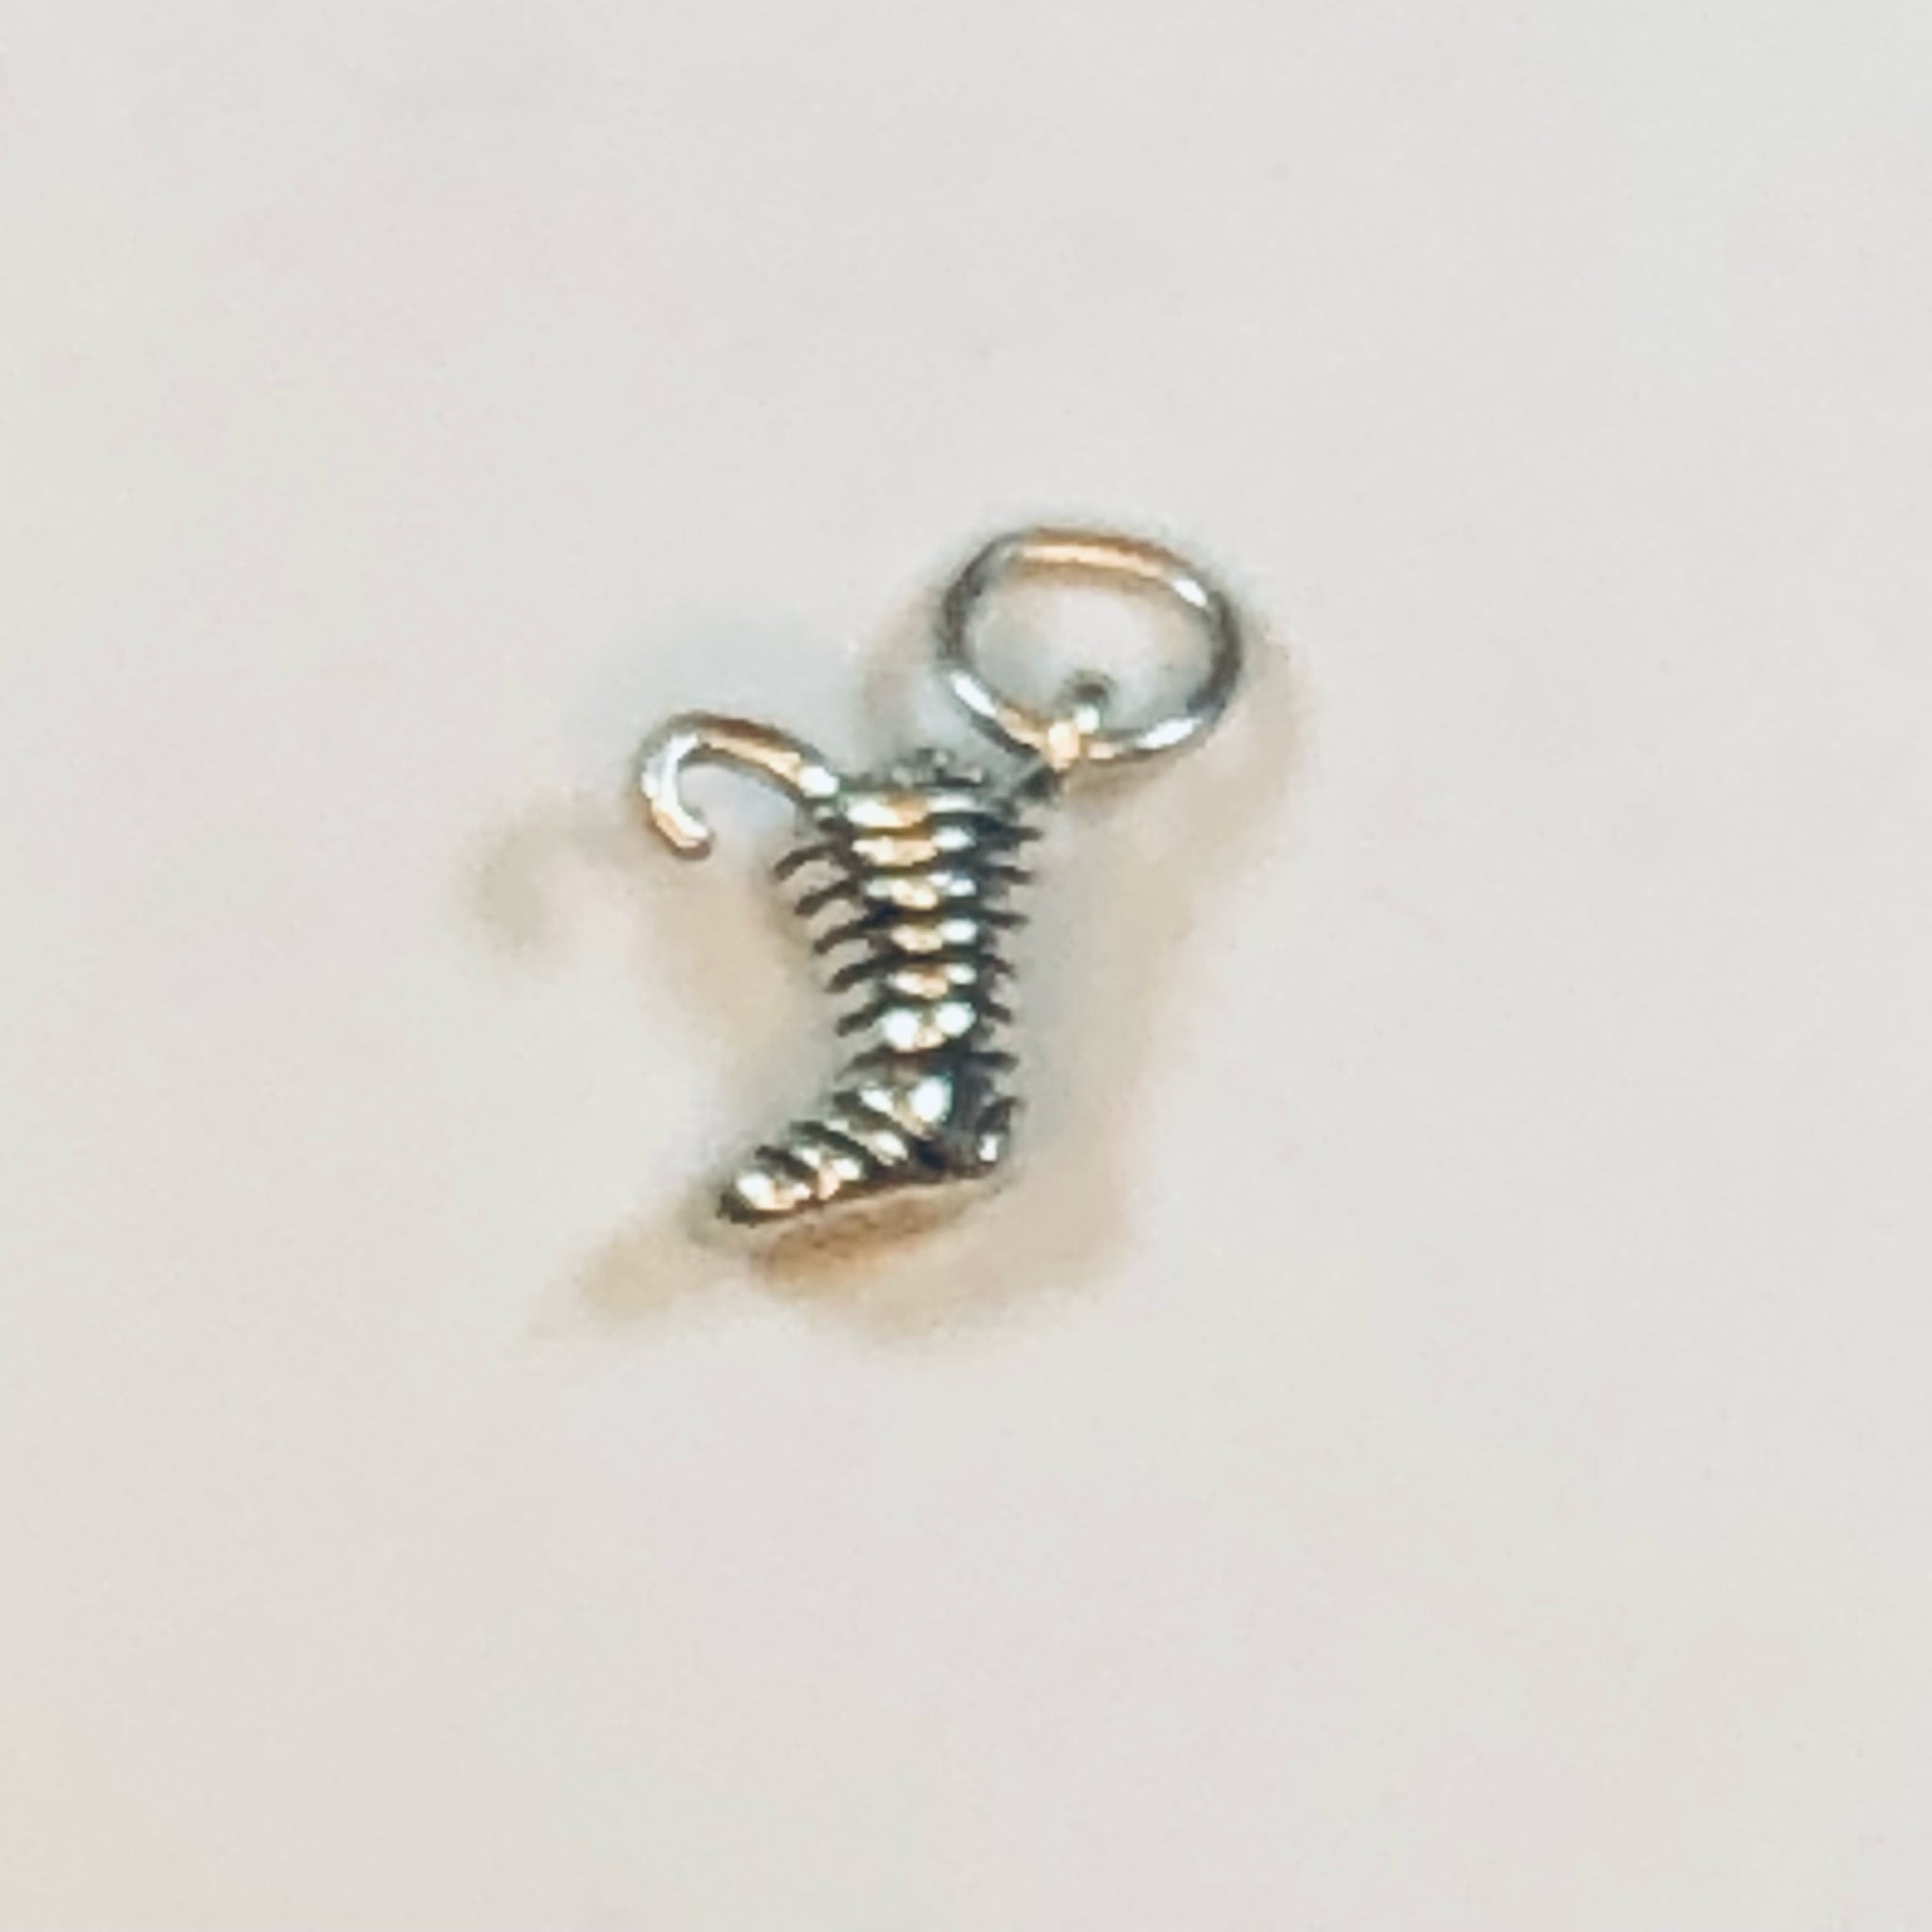 Beautiful Tiny .925 Sterling Silver Charm 3D Christmas Stocking